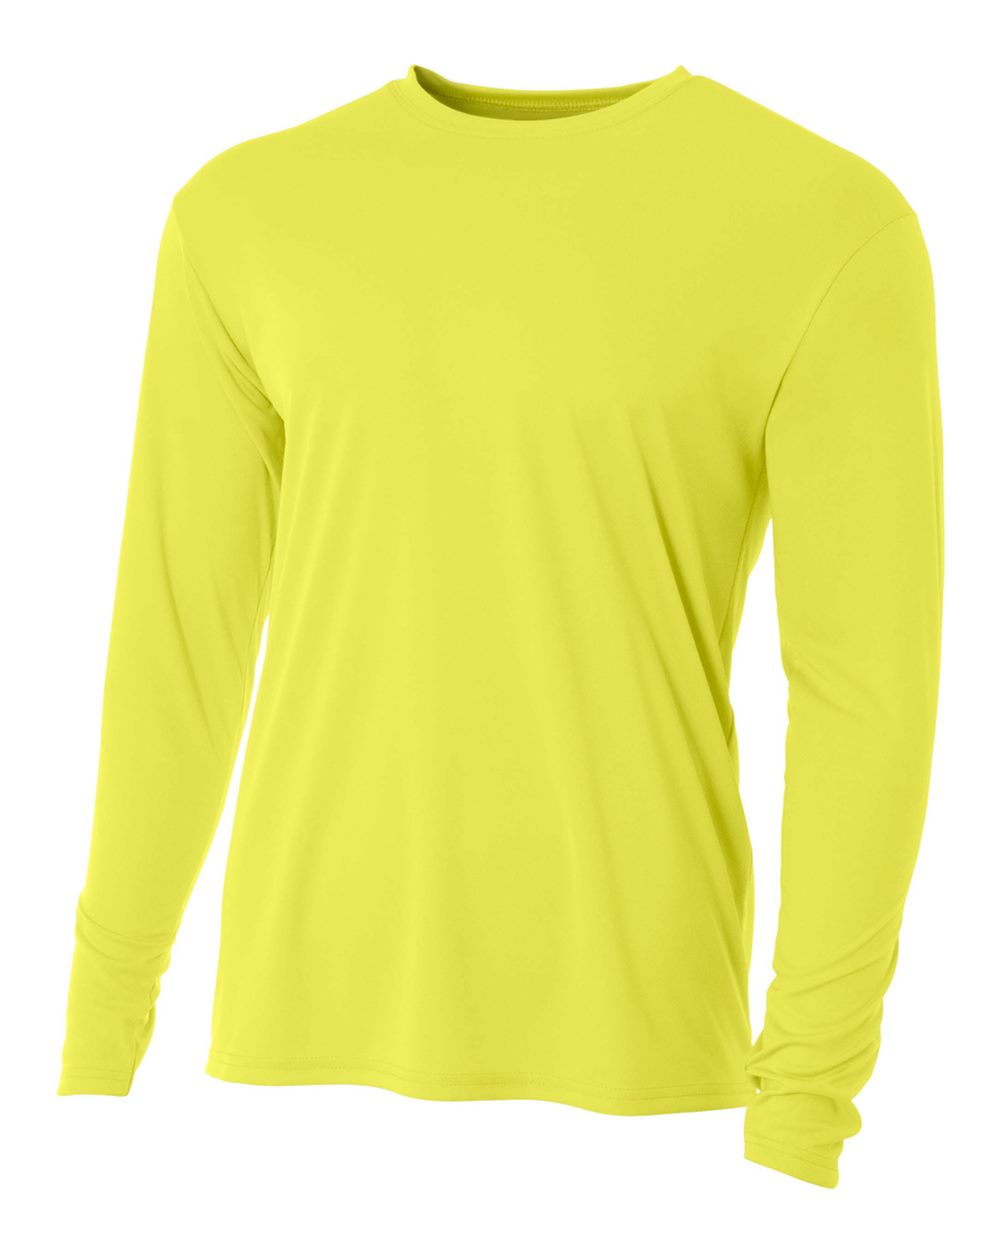 A4 Men&apos;s Performance Long Sleeve Crew (Safety Yellow)